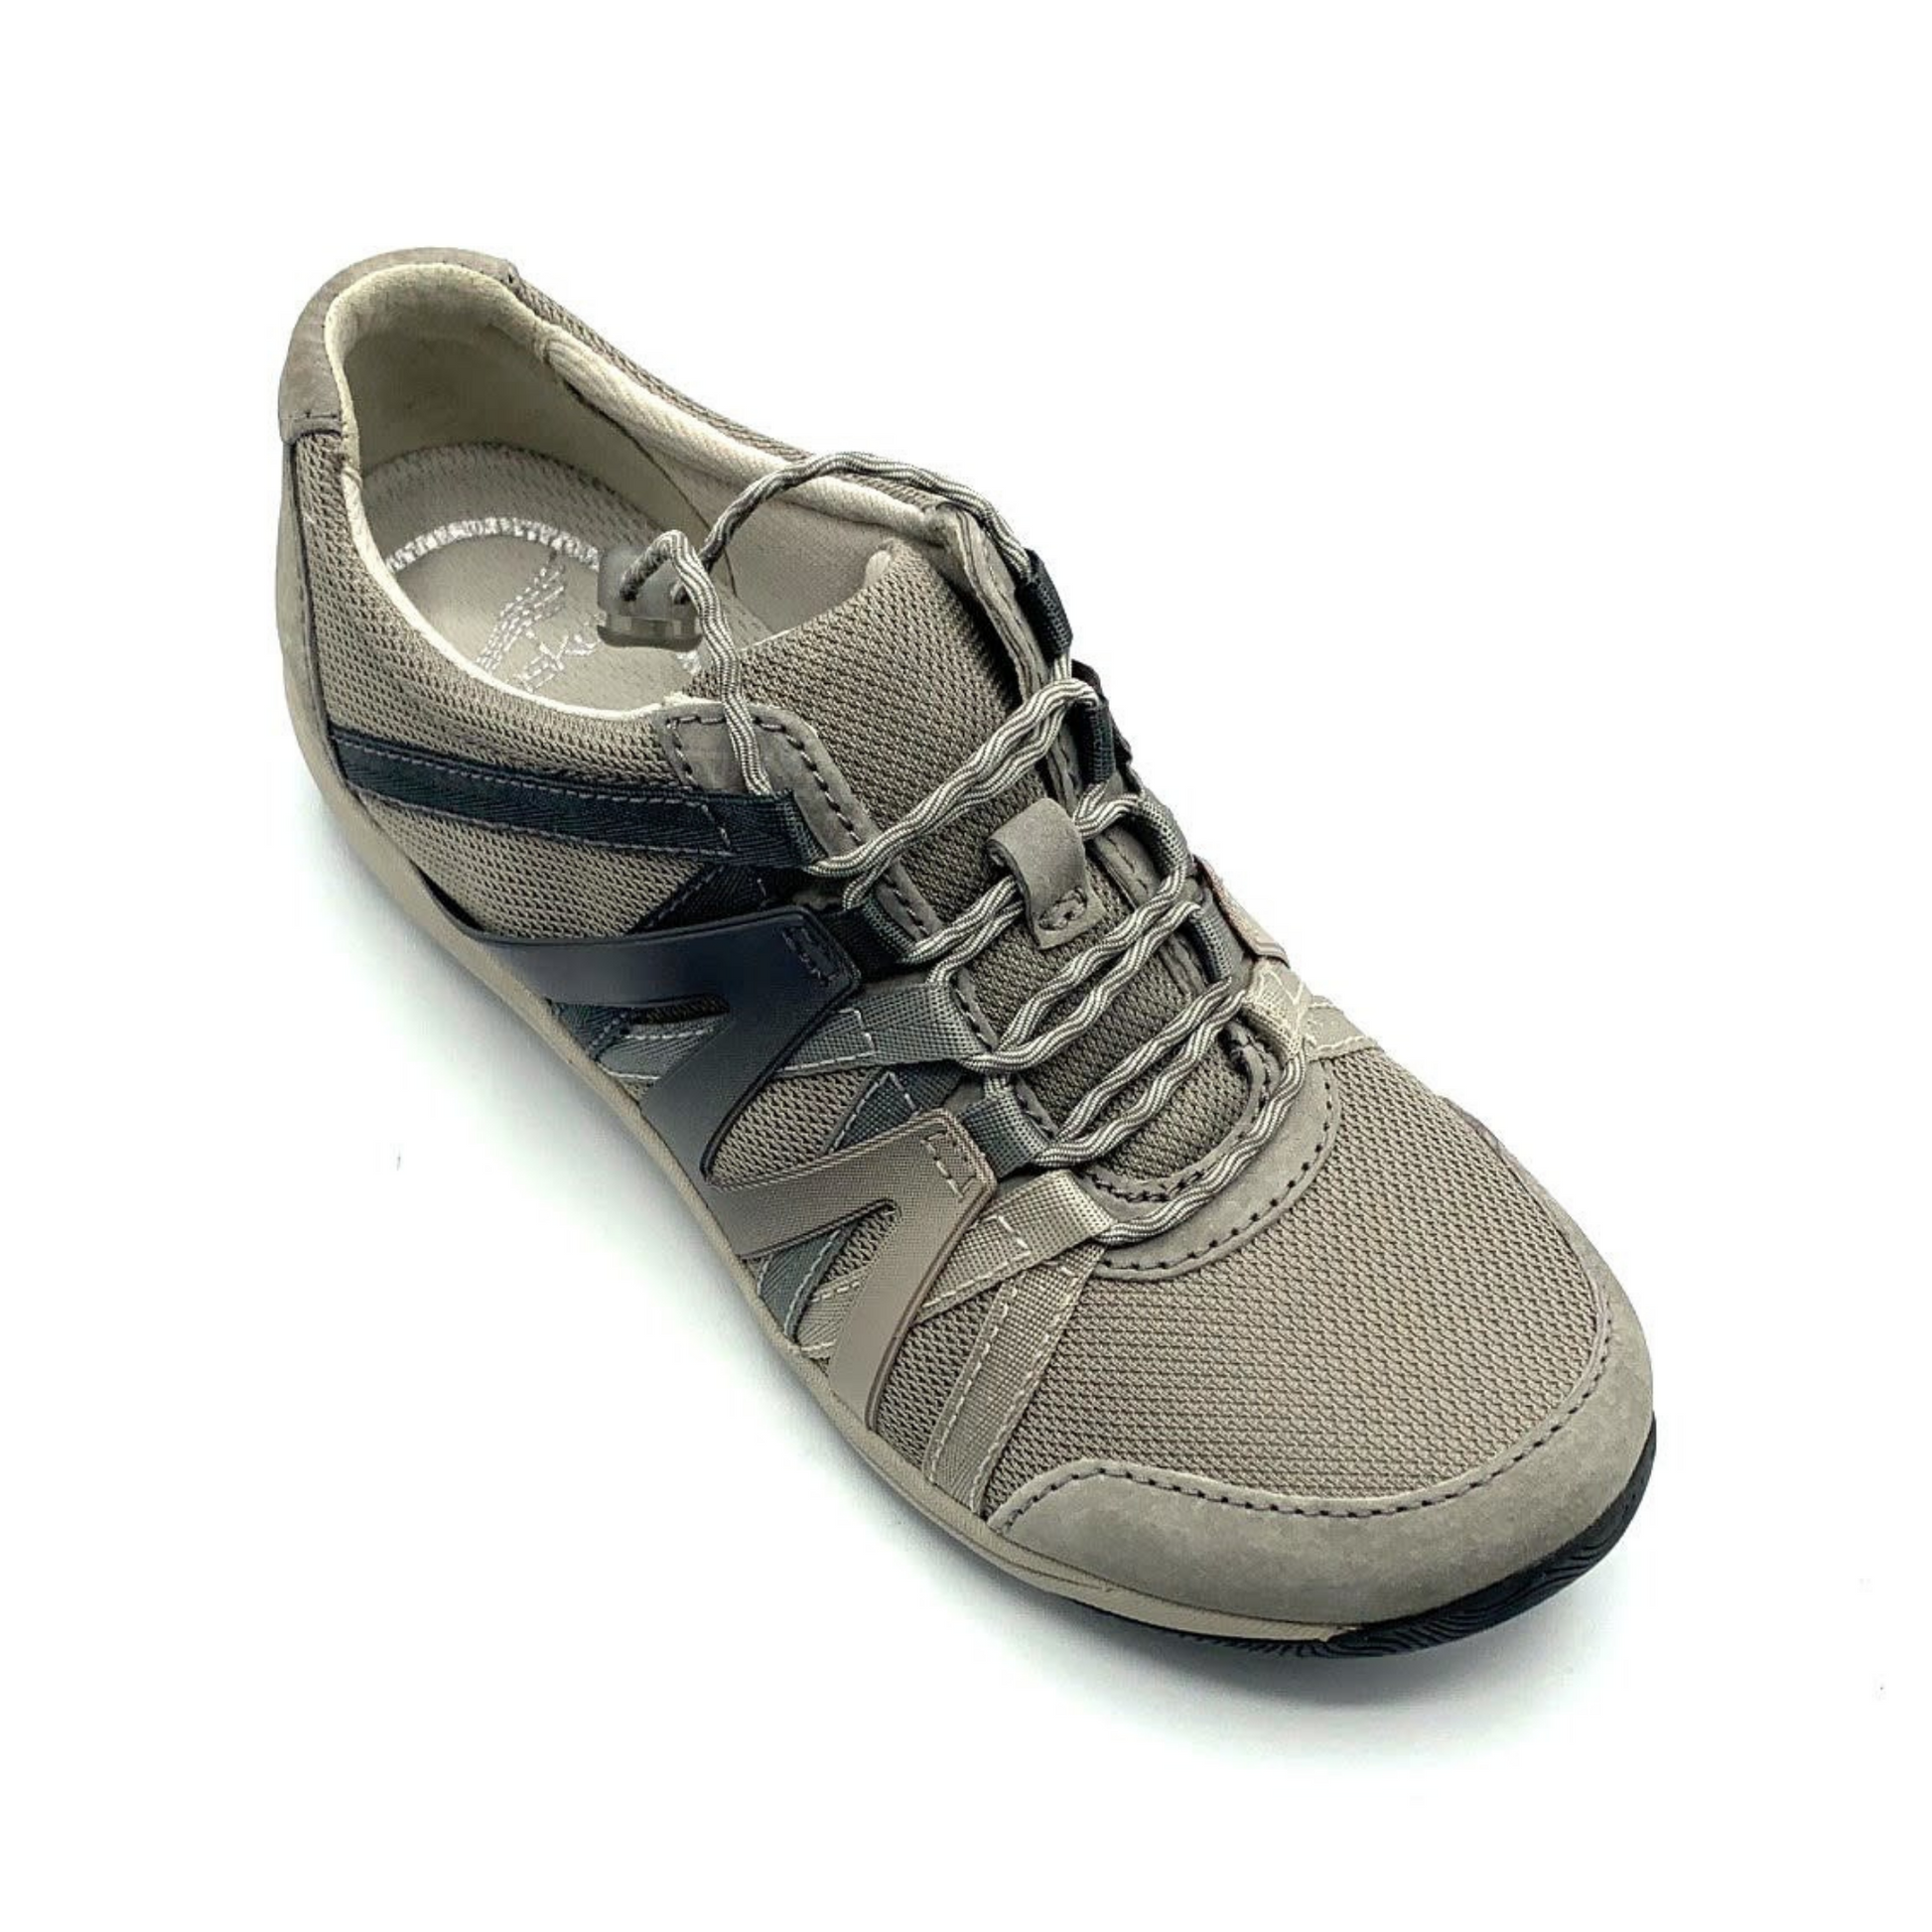 A warm grey sneaker viewed from a 45 degree angle. The shoe has grey cord-like laces, a mesh top, suede detailing, and an Ombre zig-zagged side pattern.